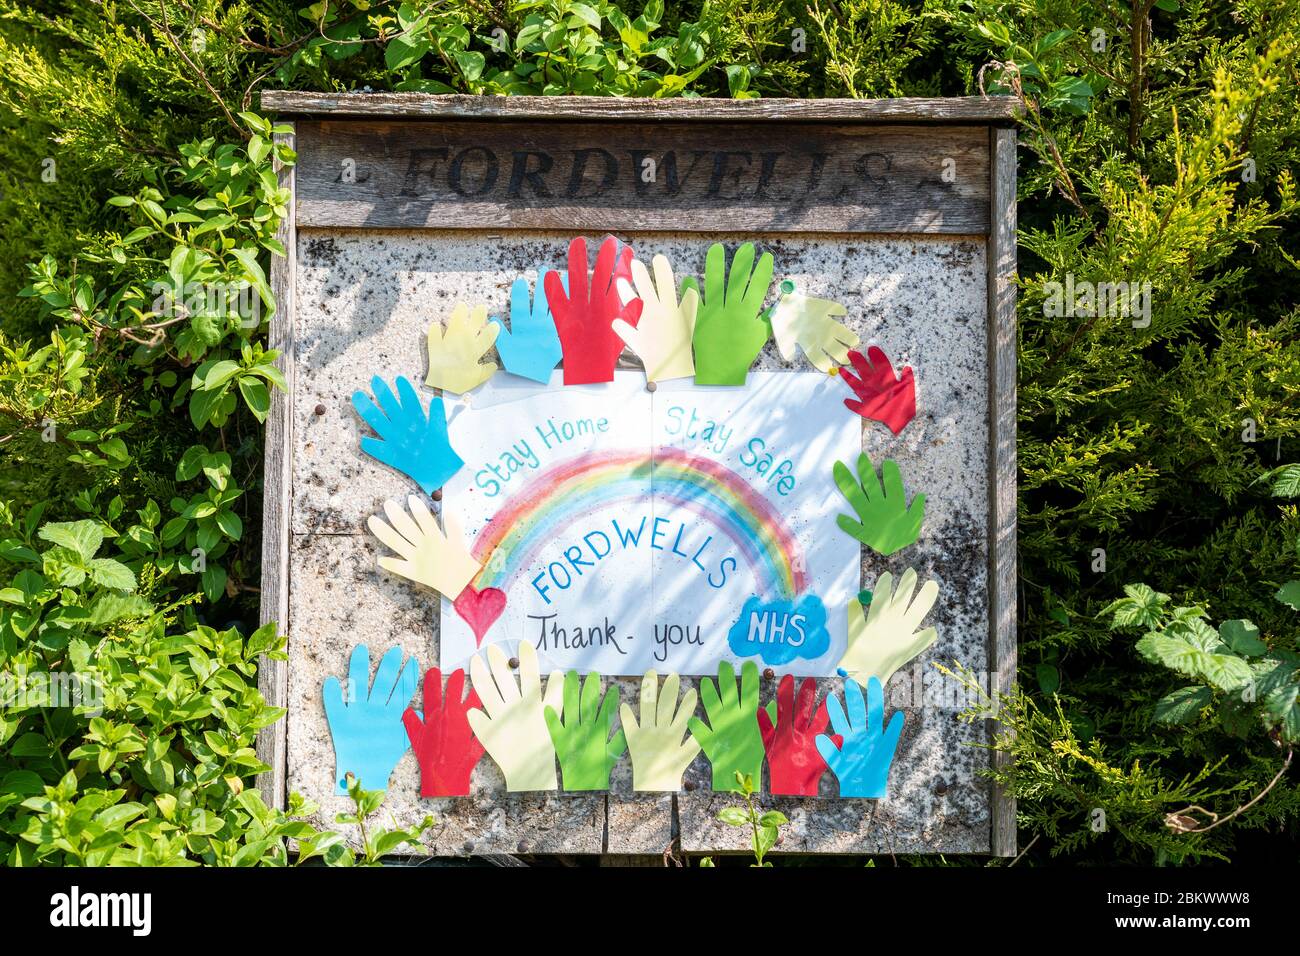 Poster of thanks - helping hands and rainbow - by local village people in praise of the National Health Service - NHS - during Coronavirus COVID-19 vi Stock Photo